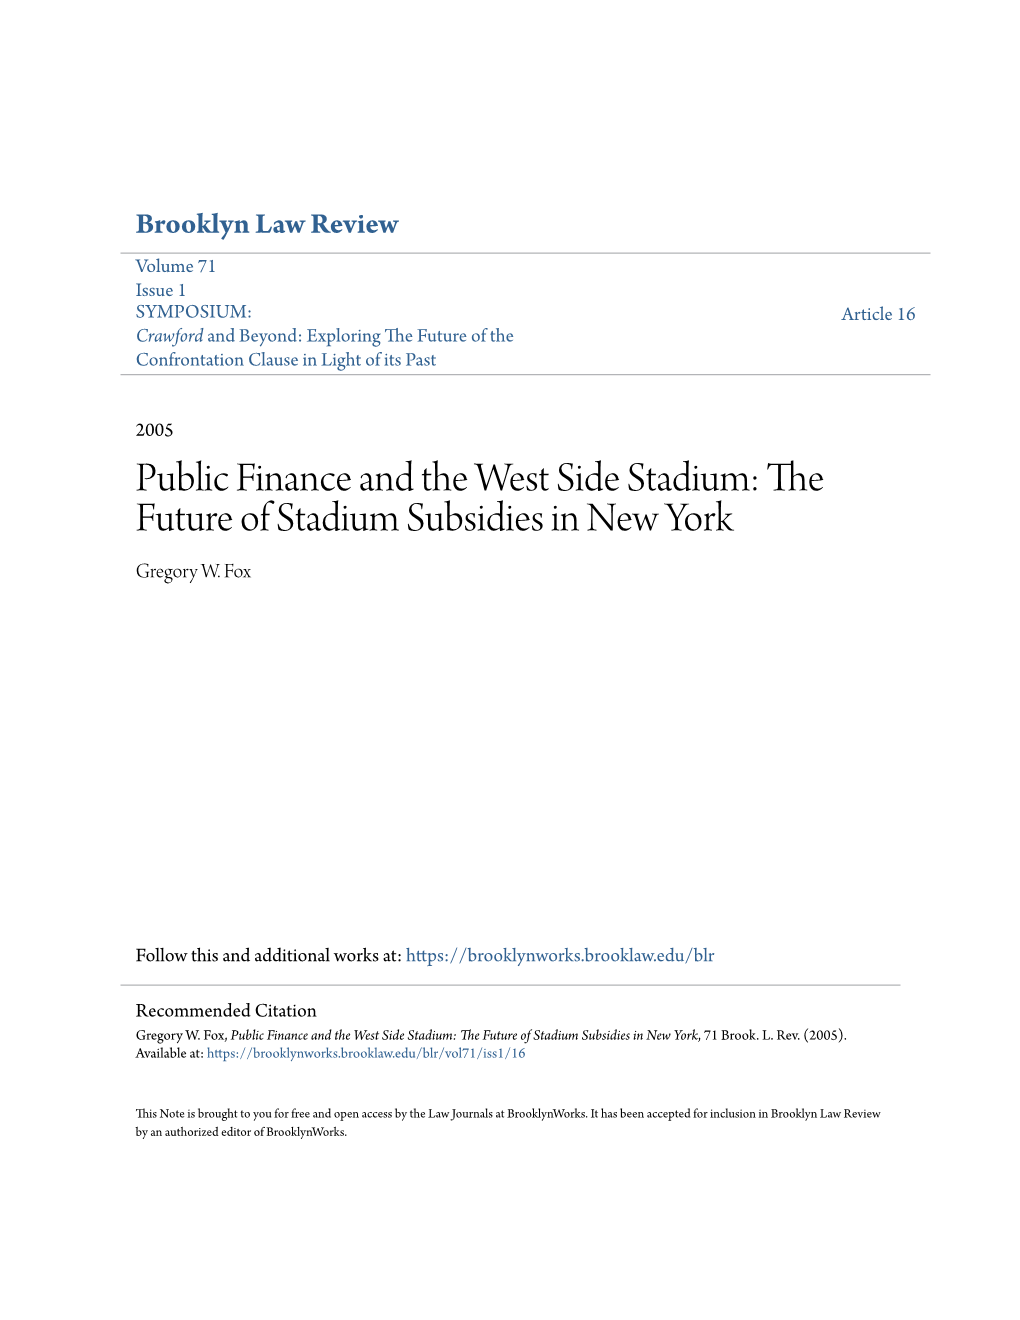 Public Finance and the West Side Stadium: the Future of Stadium Subsidies in New York Gregory W